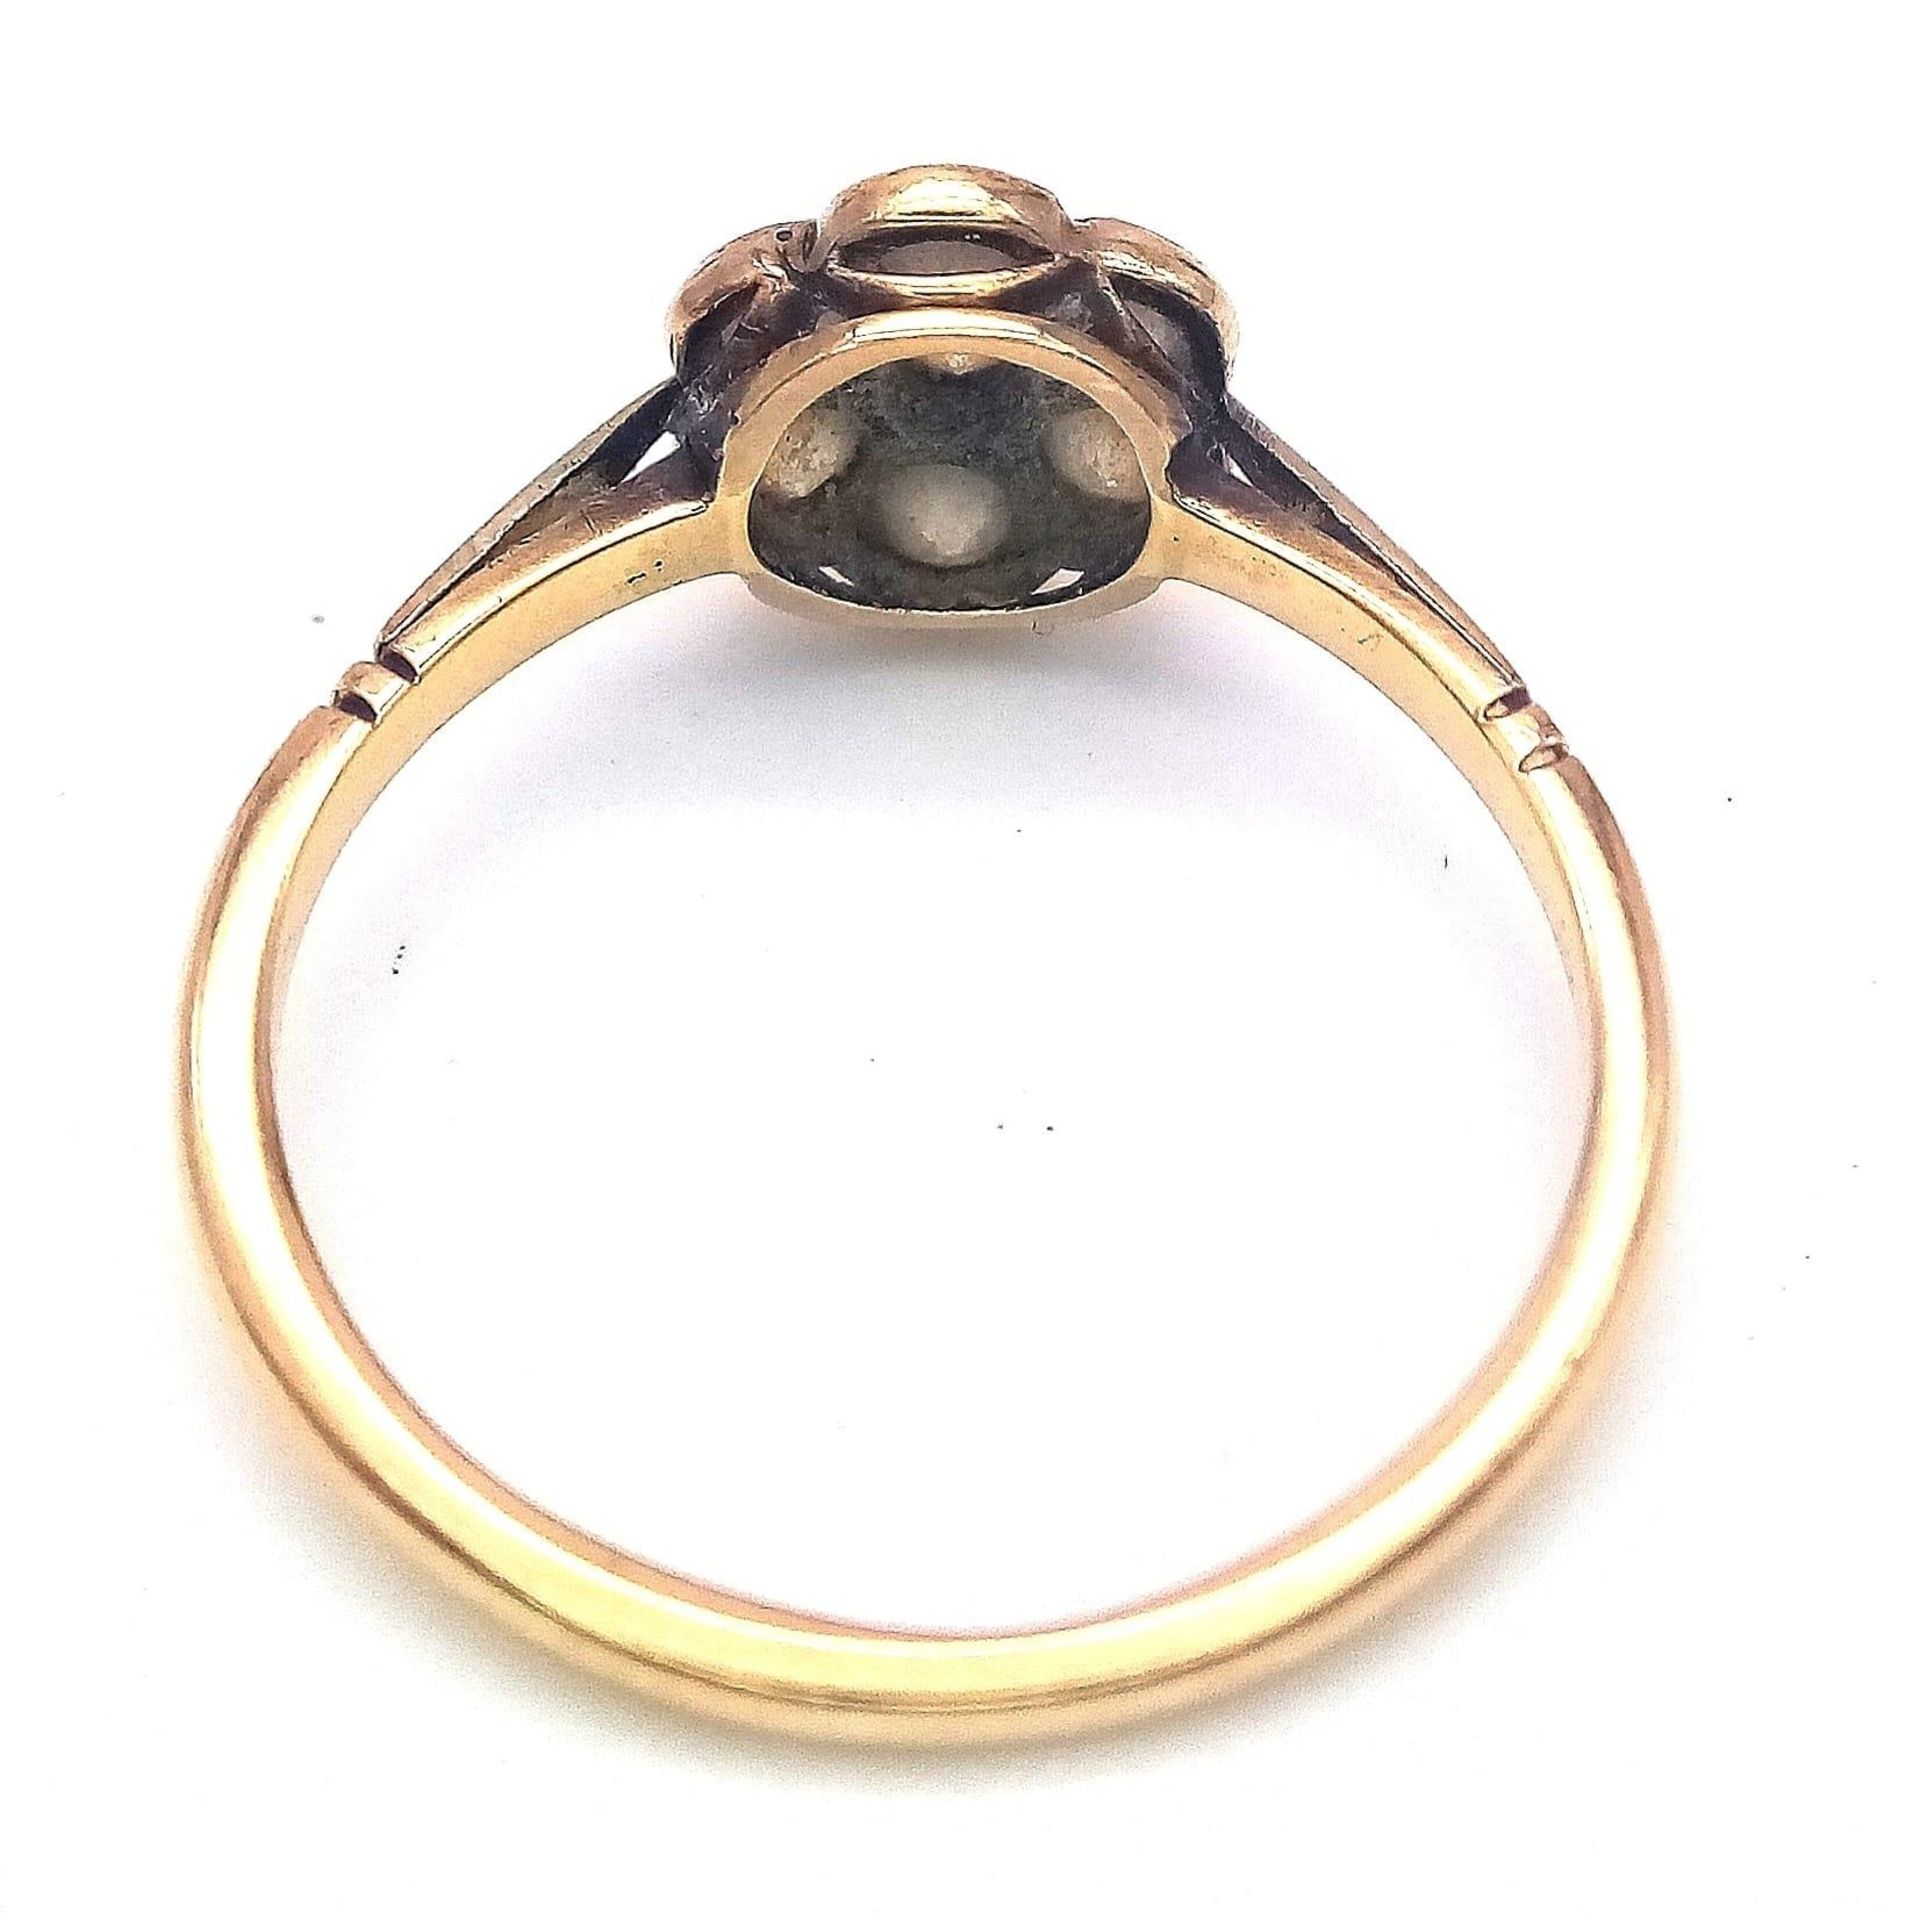 A Vintage 18K Yellow Gold Diamond Ring. Seven round cut diamonds in a floral shape. Size P. 2.52g - Image 12 of 19